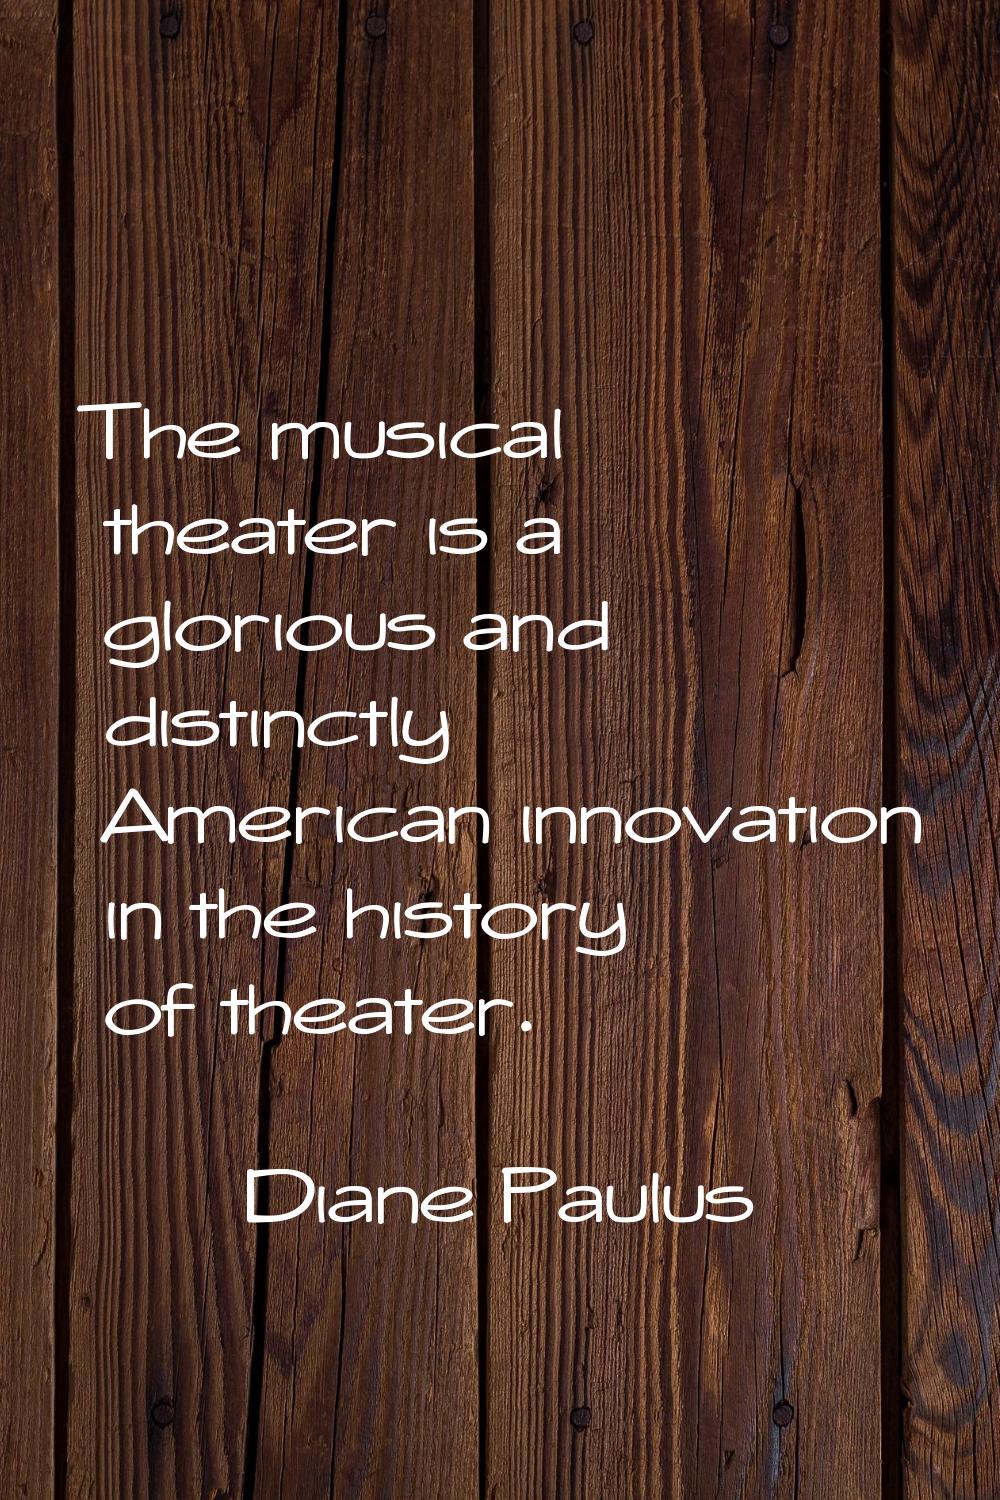 The musical theater is a glorious and distinctly American innovation in the history of theater.